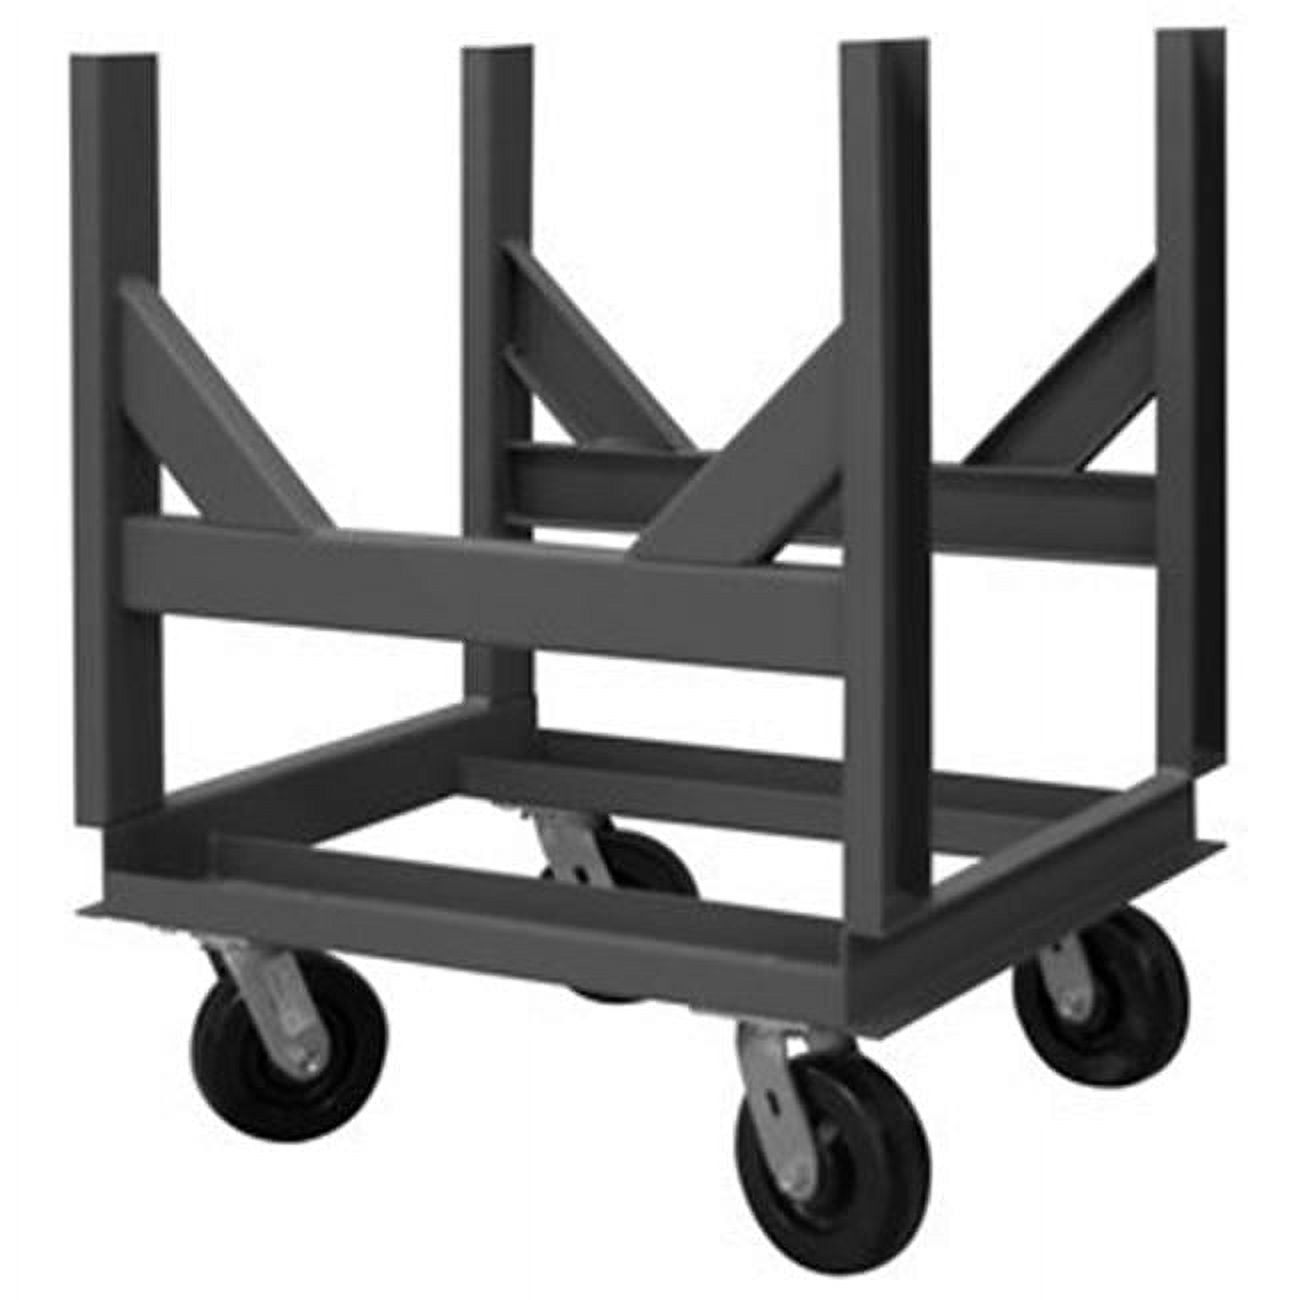 Picture of Durham BCTE-2824-4K-95 35 in. Bar Cradle Truck, Gray - 4000 lbs